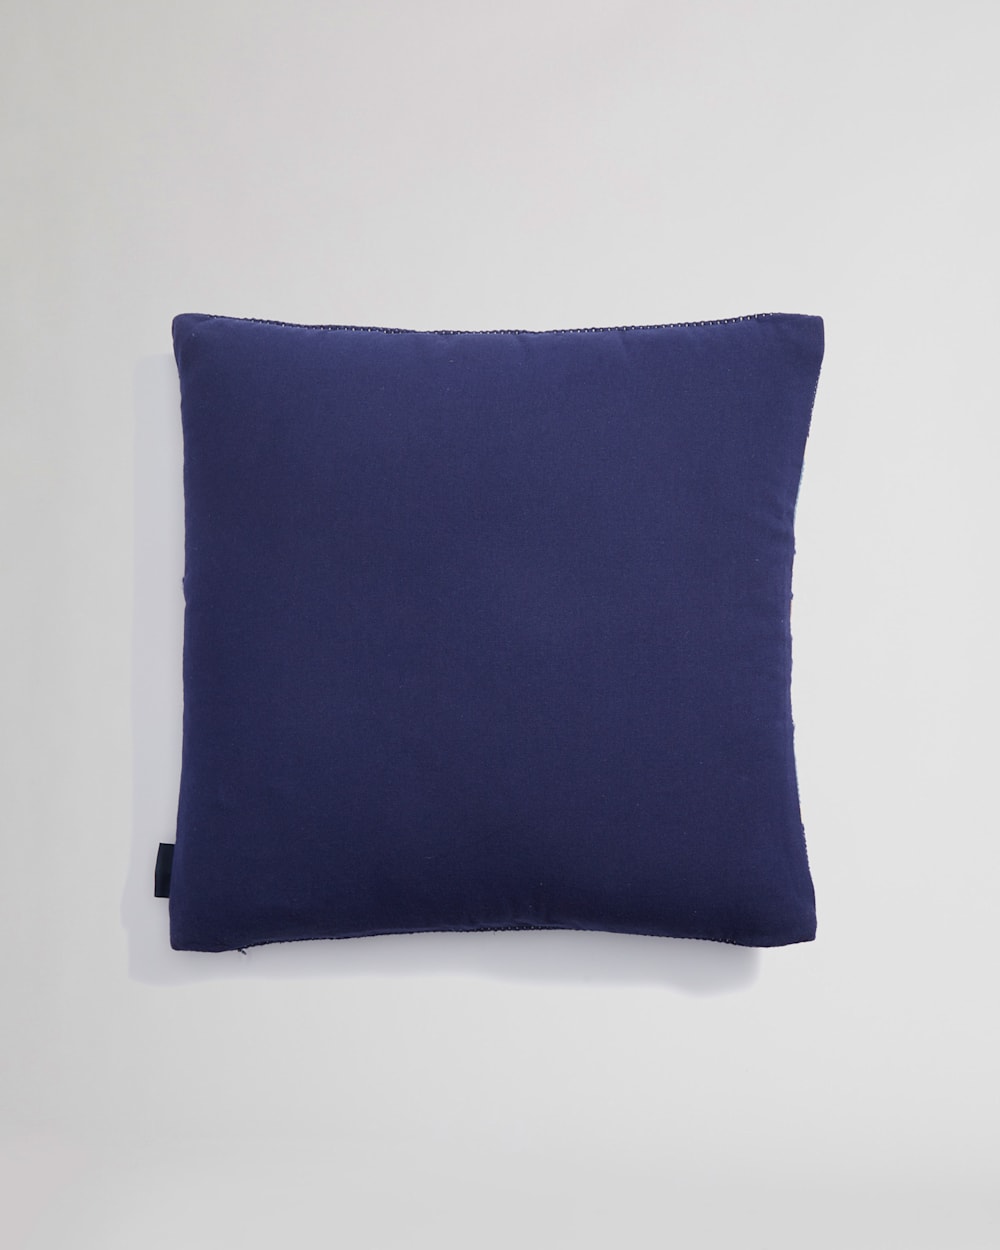 ALTERNATE VIEW OF HORIZON DAWN SQUARE PILLOW IN NAVY MULTI image number 3